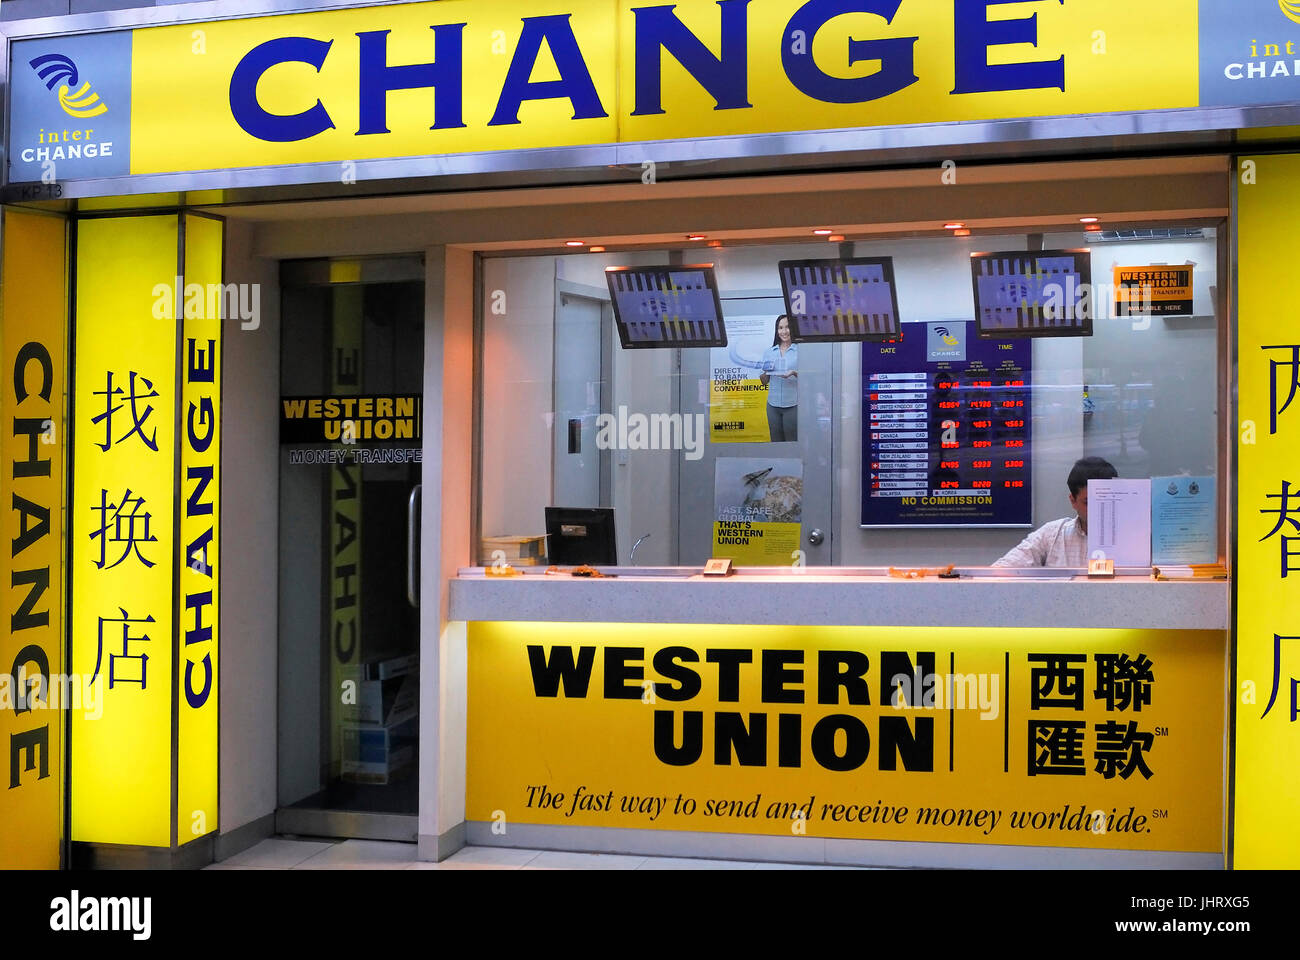 Western Union Office High Resolution Stock Photography and Images - Alamy